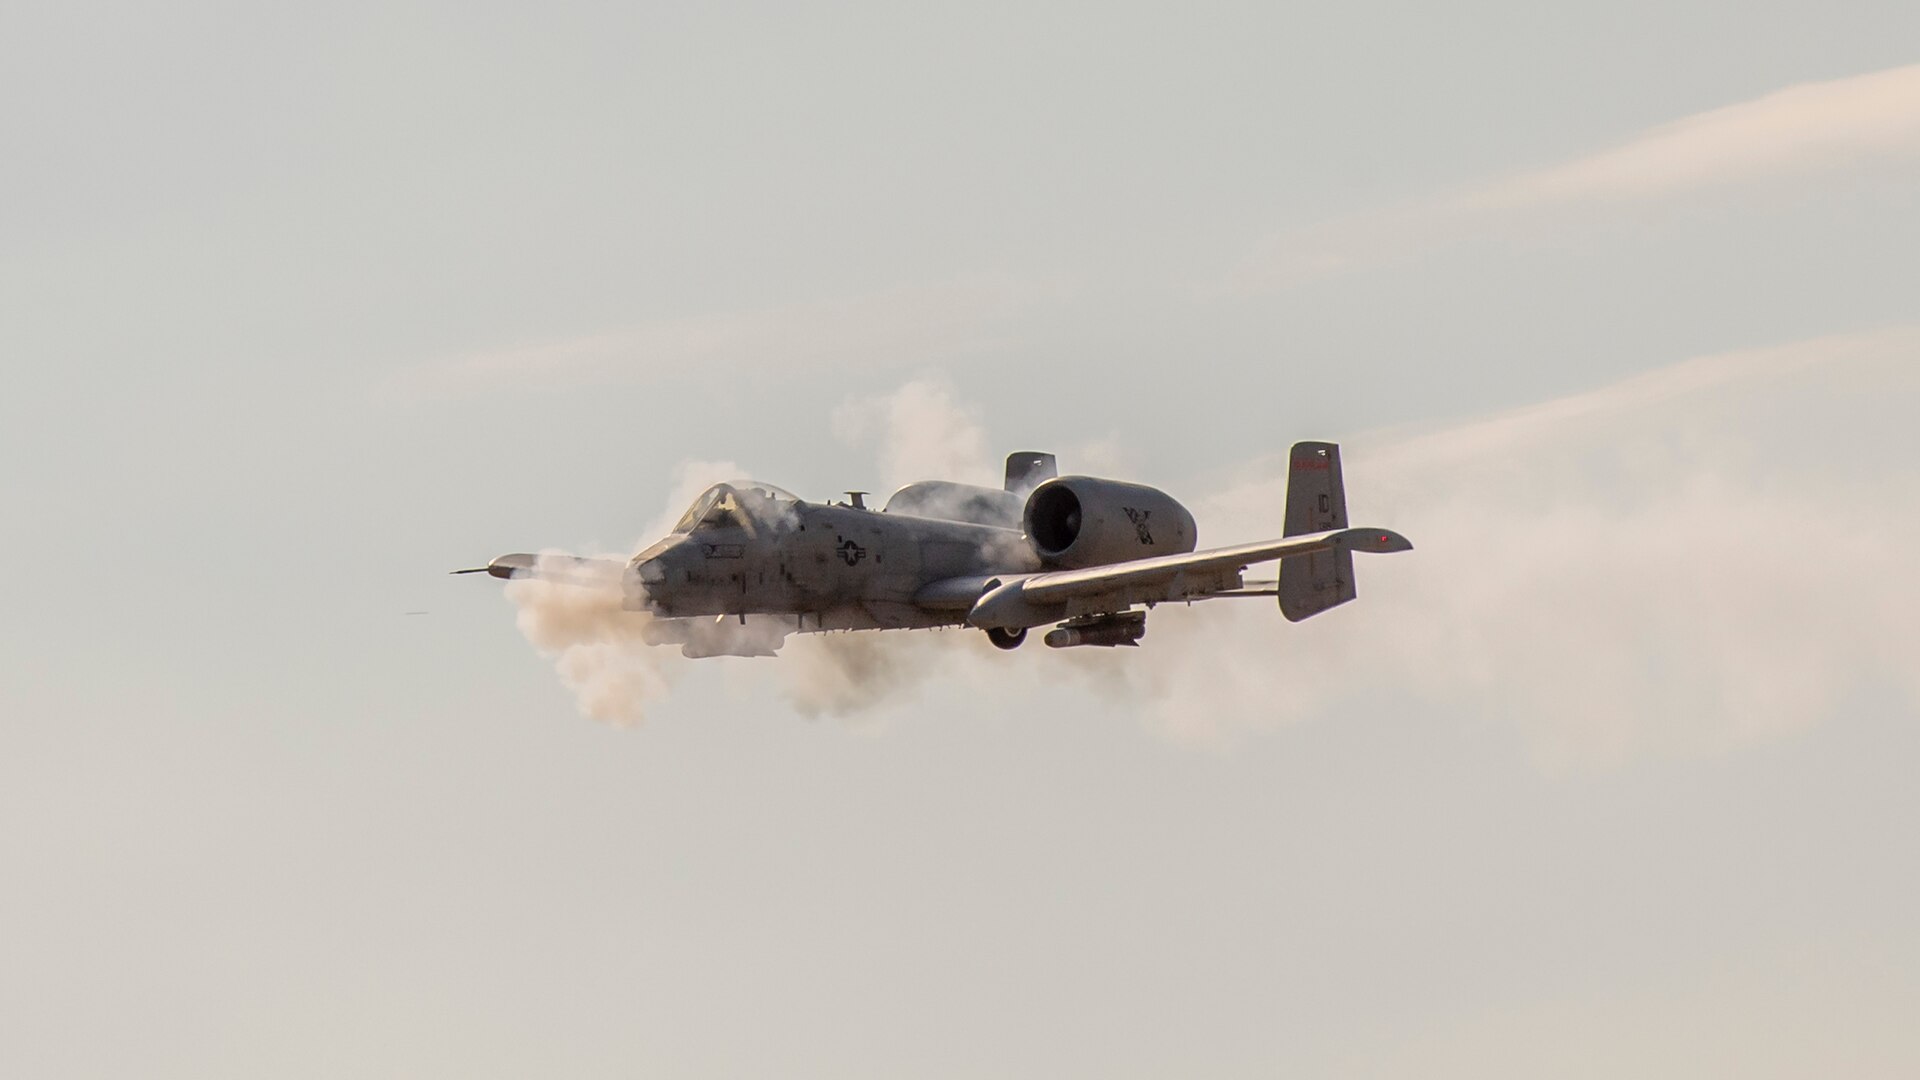 An A-10 Thunderbolt II from the Idaho National Guard’s 124th Fighter Wing, Boise, Idaho, performs a strafing run during the Hawgsmoke 2022 gunnery competition at the Saylor Creek Bombing Range south of Mountain Home, Idaho, Sept. 8, 2022. The competition traces its heritage back to 1949 and the Gunsmoke gunnery competition.